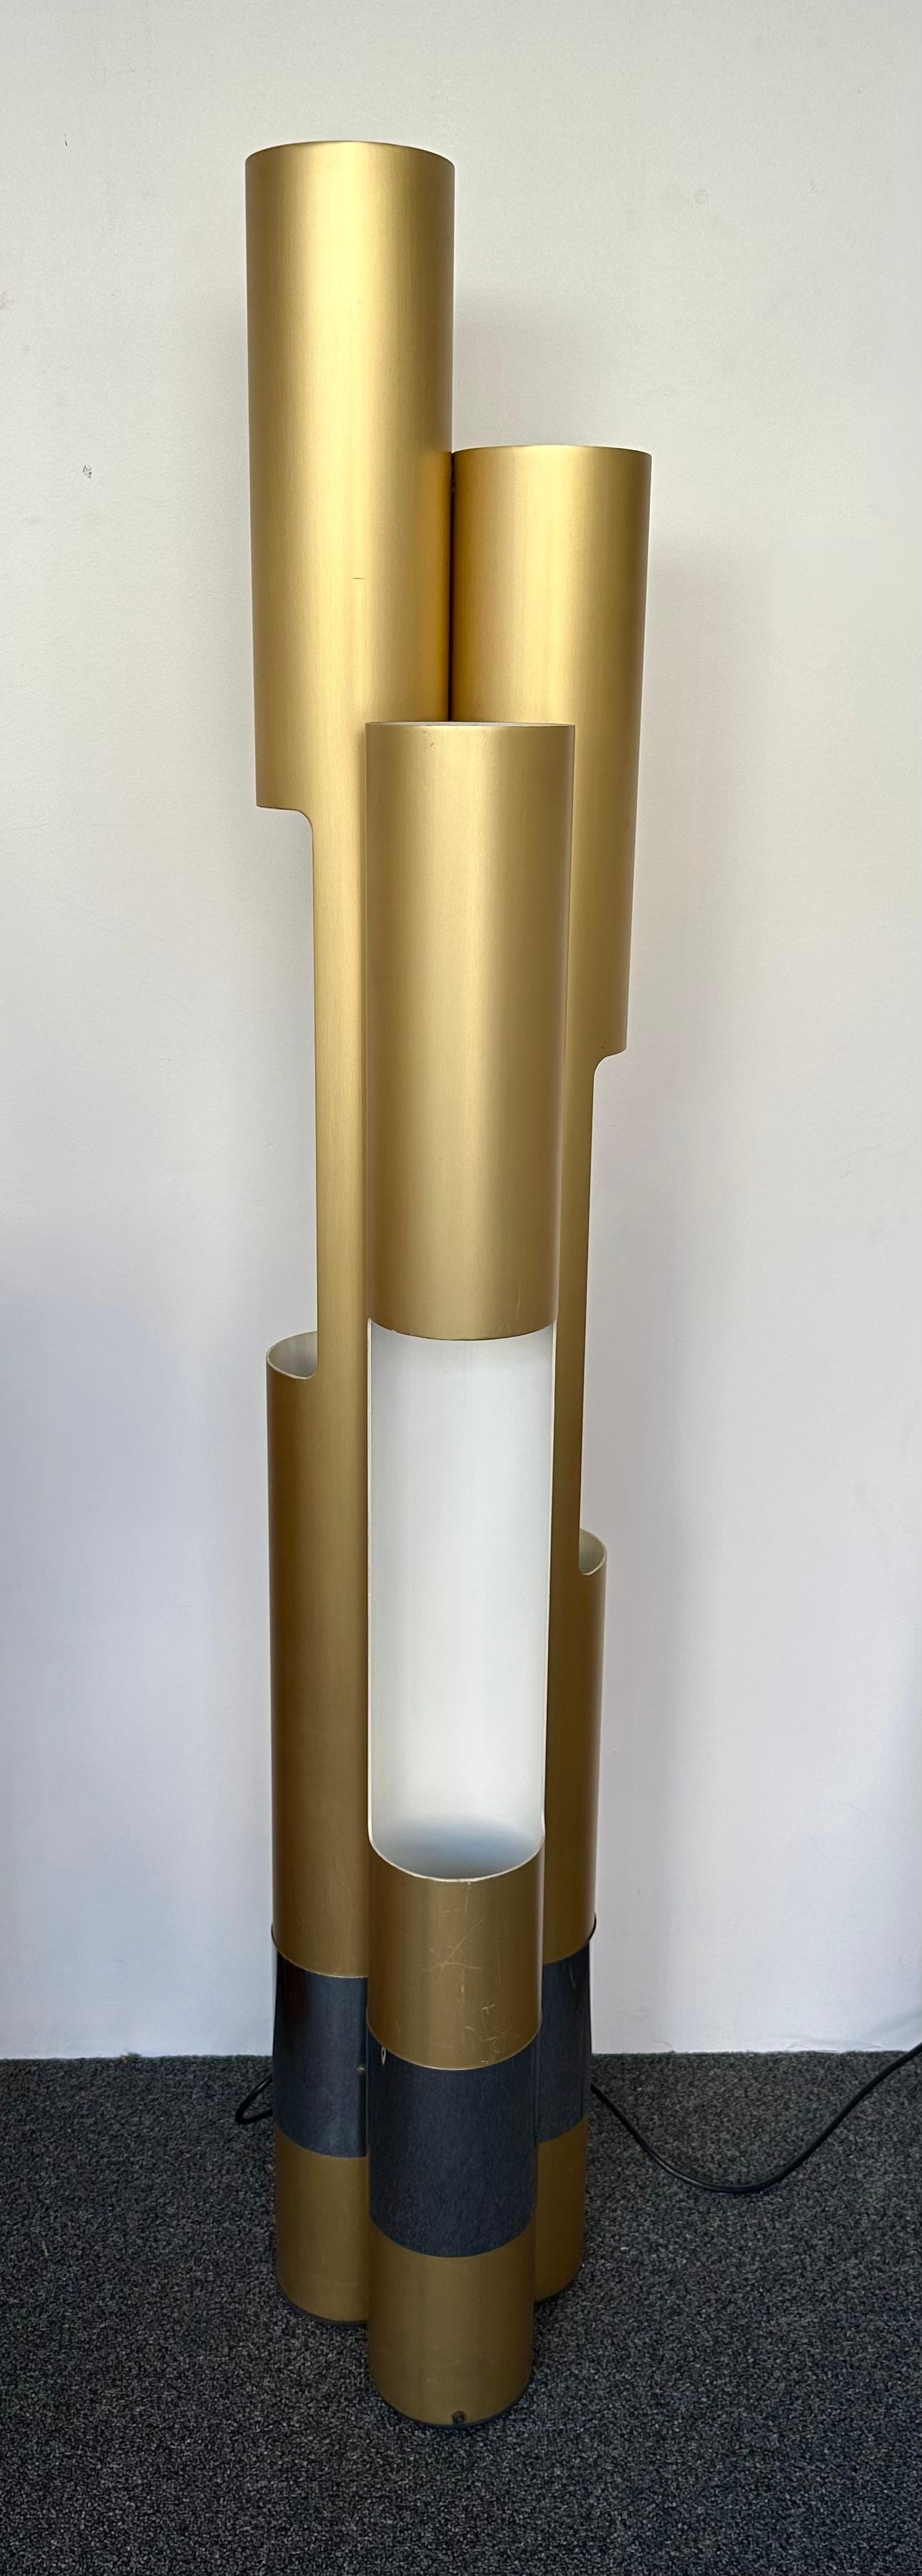 Mid-Century Space Age Gold Metal Organ Floor Lamp by Luci, Italy, 1970s For Sale 3